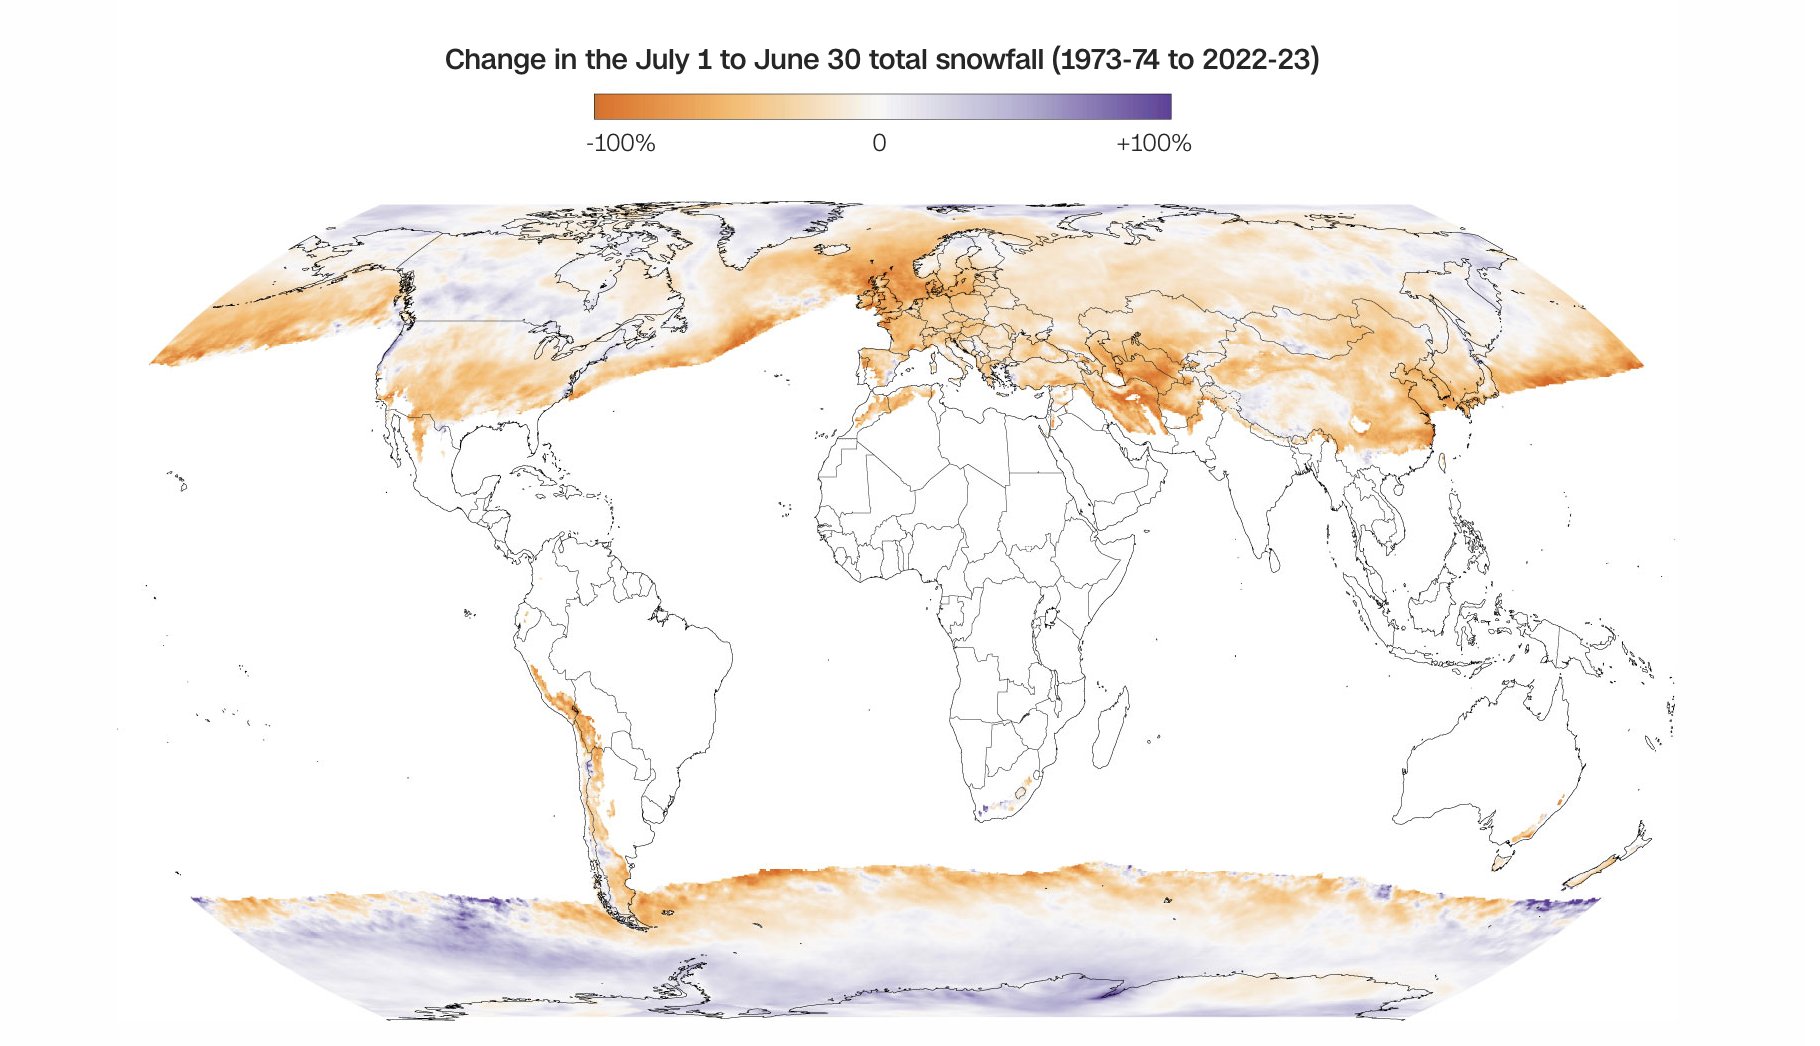 Snowfall is changing across the globe, new maps show